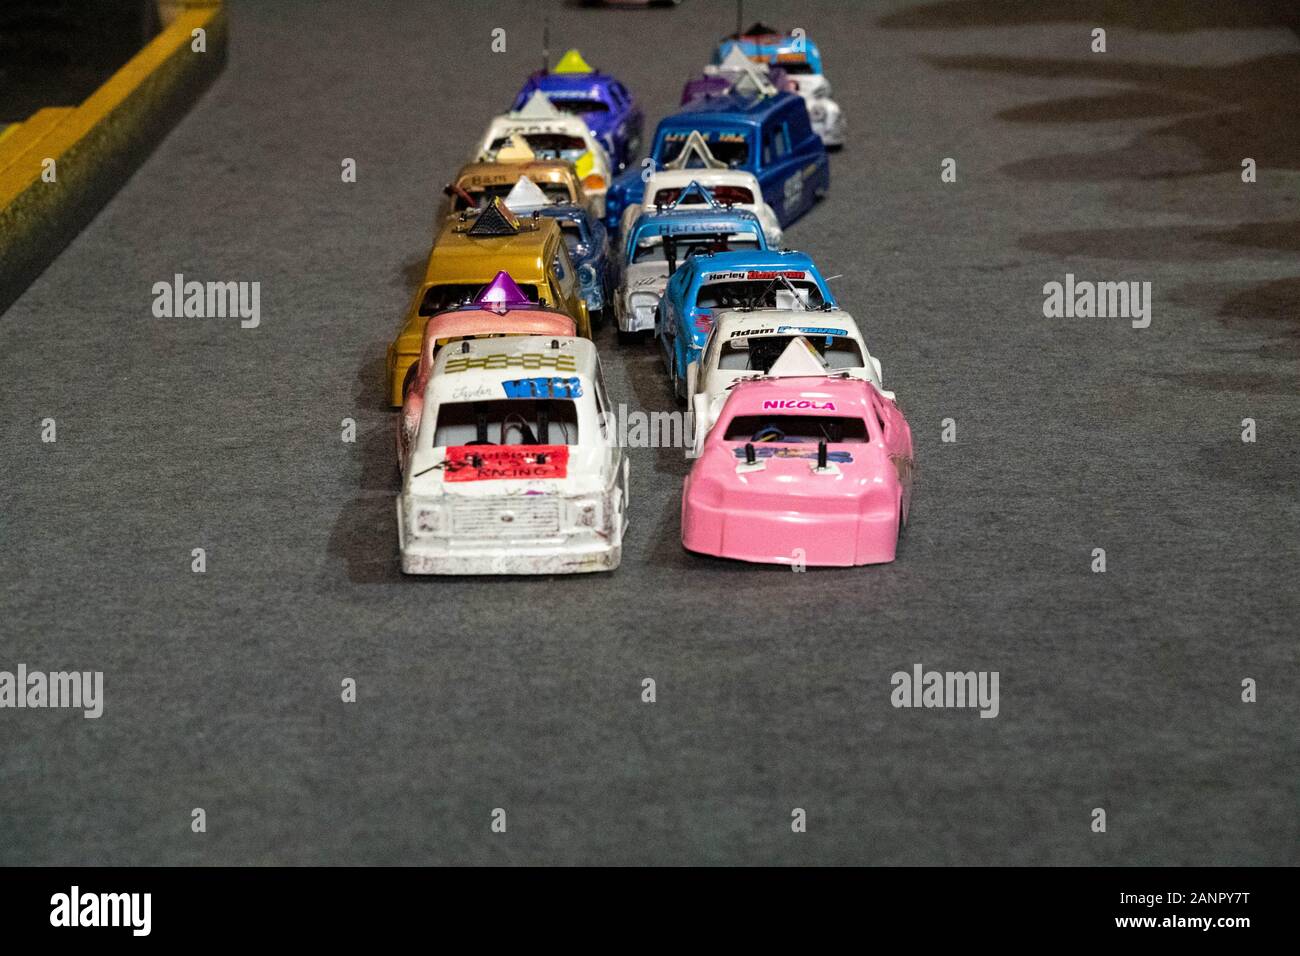 Brentwood Essex UK 18th Jan.2020 Brentood Remote Control Raceway event featuring 12th scale RC model racing, bankers 130th stock cars etc  held in an industiral unit,  with Juniors and adult competitons with over 150 participants. A specialist, niche racing hobby with a large following in the UK Credit Ian DavidsonAlamy Live News Stock Photo